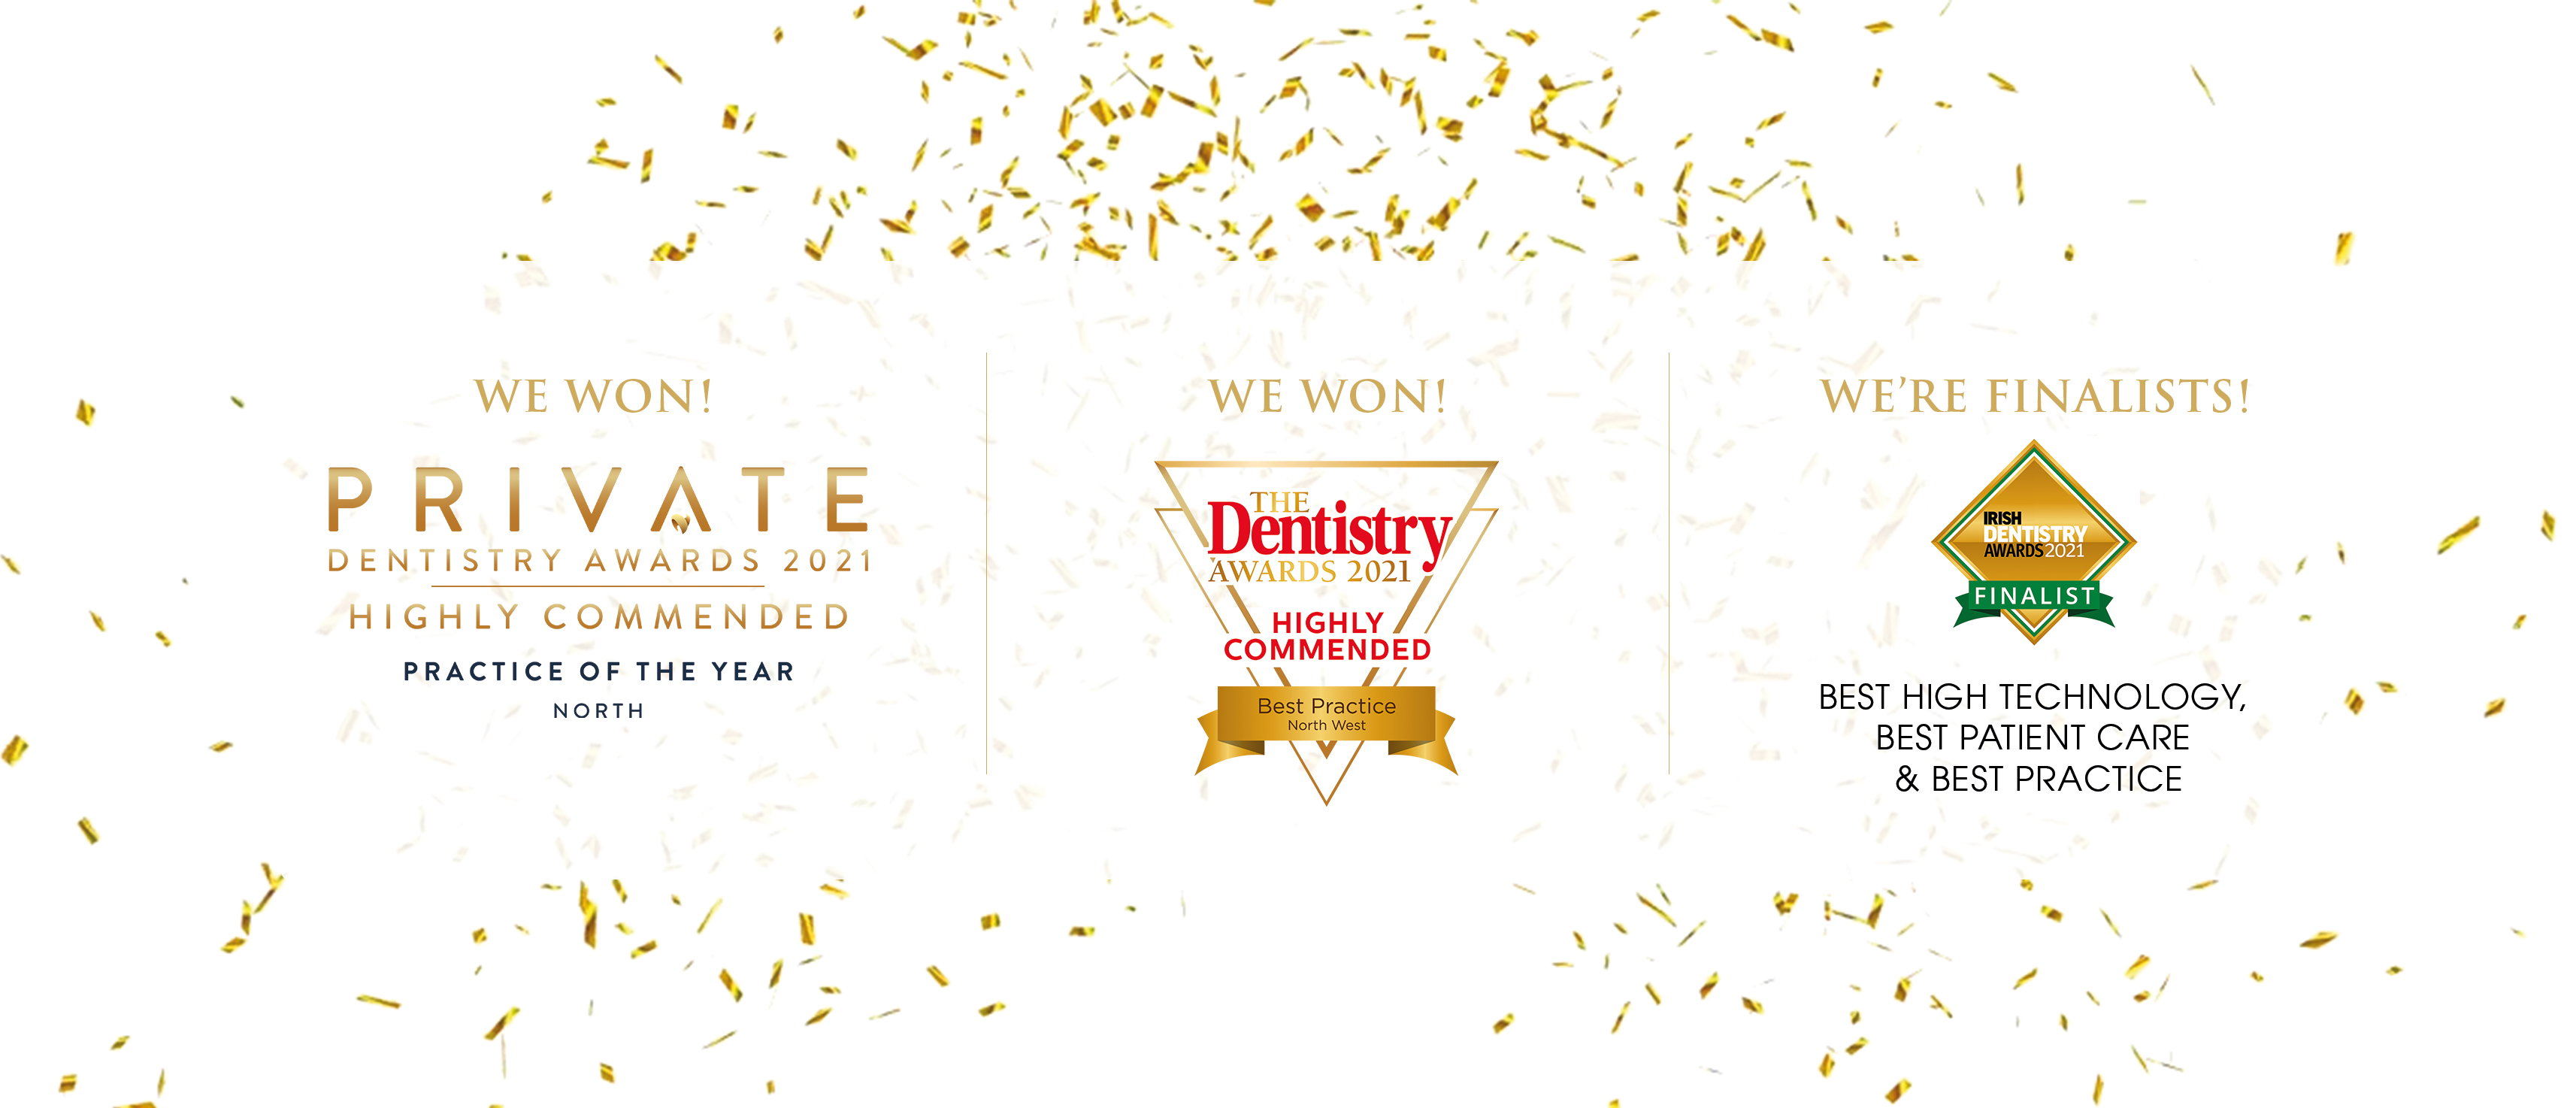 Dentistry awards and Private Dentistry awards - Best High Technology practice, Best patient Care and practice of the year